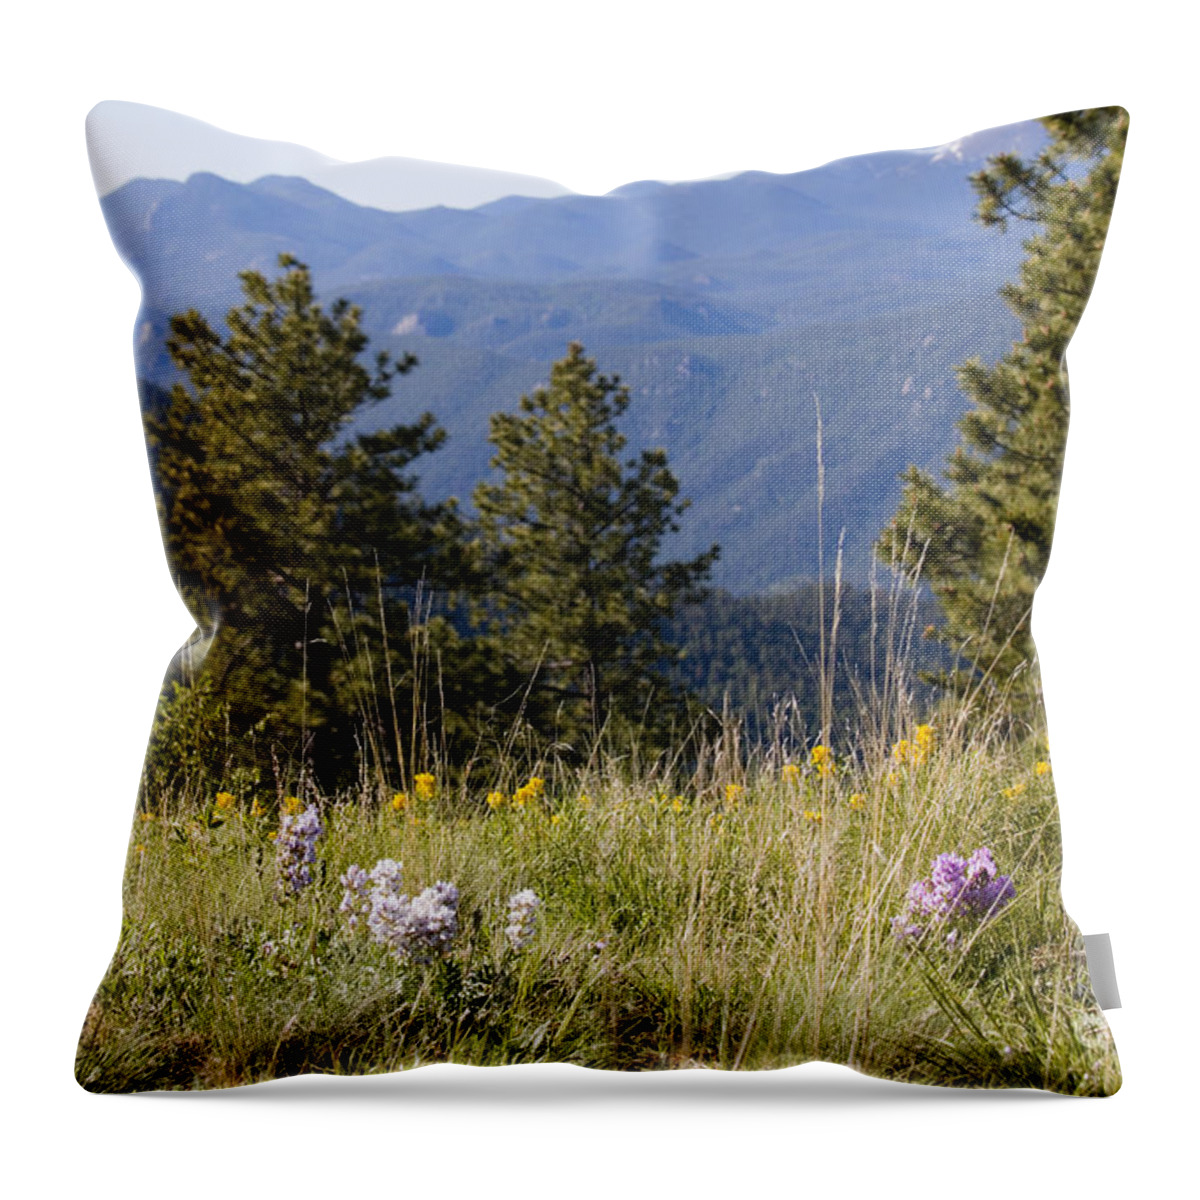 Colorful Throw Pillow featuring the photograph Mountain Bluebell and Wildflowers in Ute Pass by Steven Krull